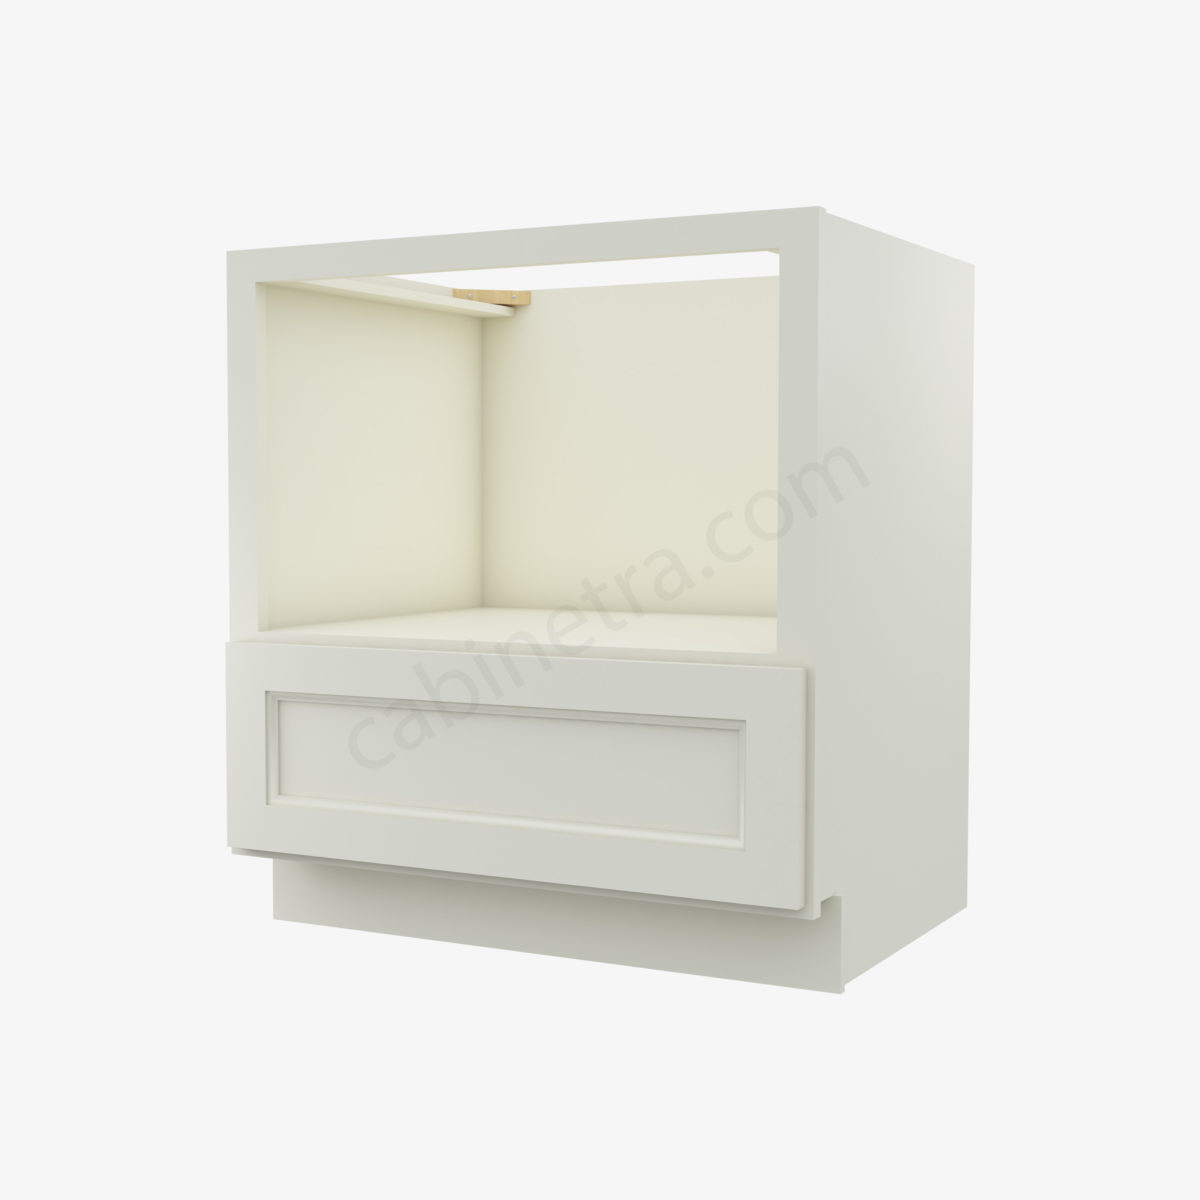 TQ B30MW 0 Forevermark Townplace Crema Cabinetra scaled